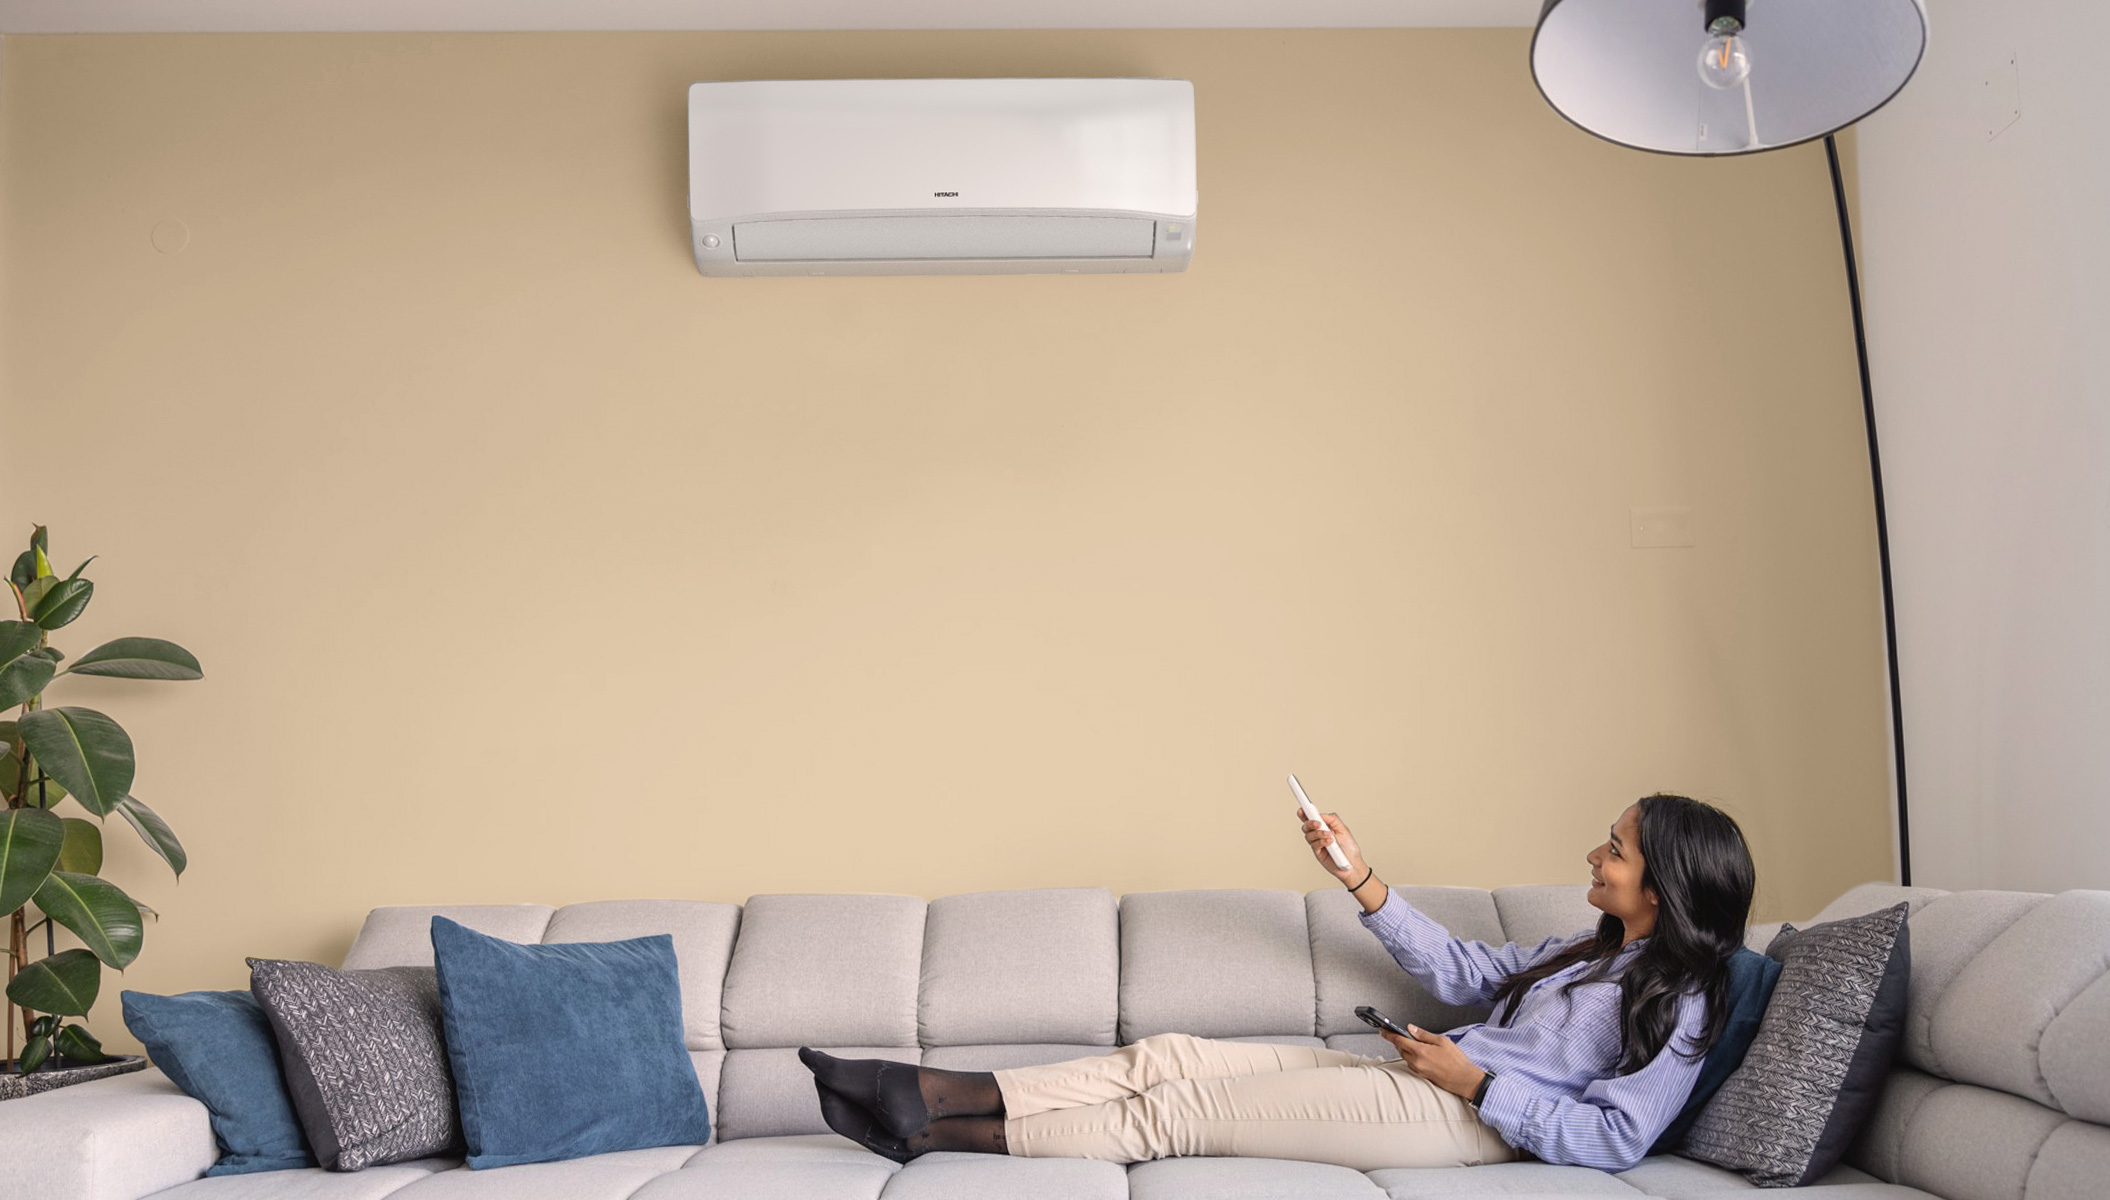 Preventing Bad Smells in Your Air Conditioner